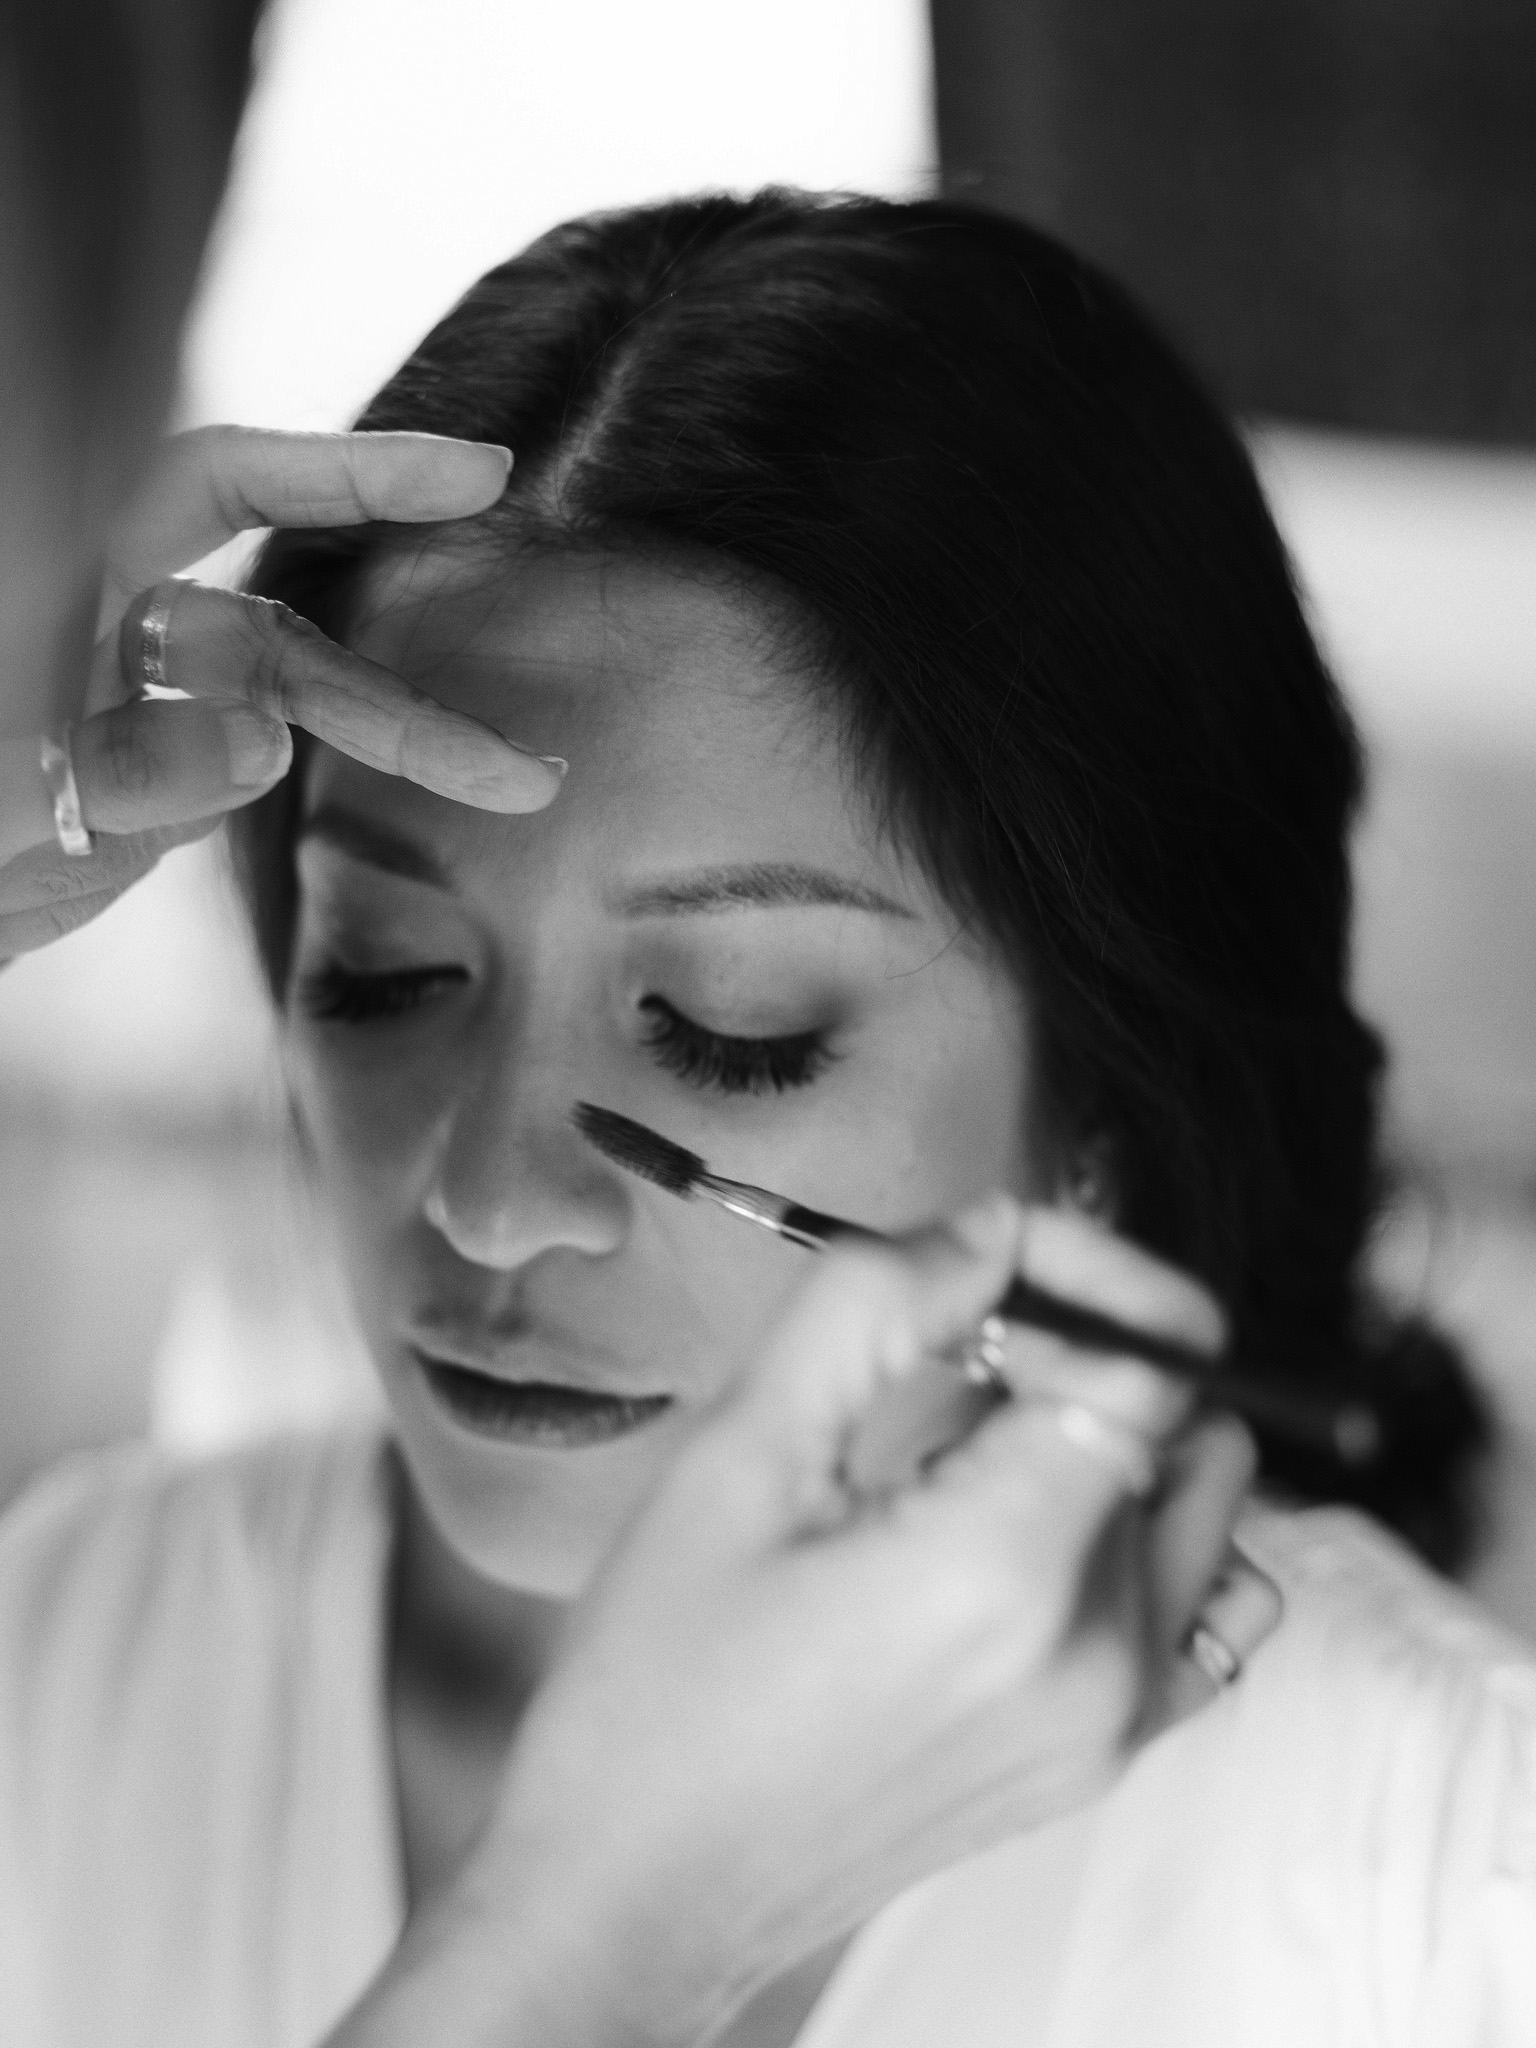 Make-up is being applied to the bride. Editorial destination wedding photo by Jenny Fu Studio